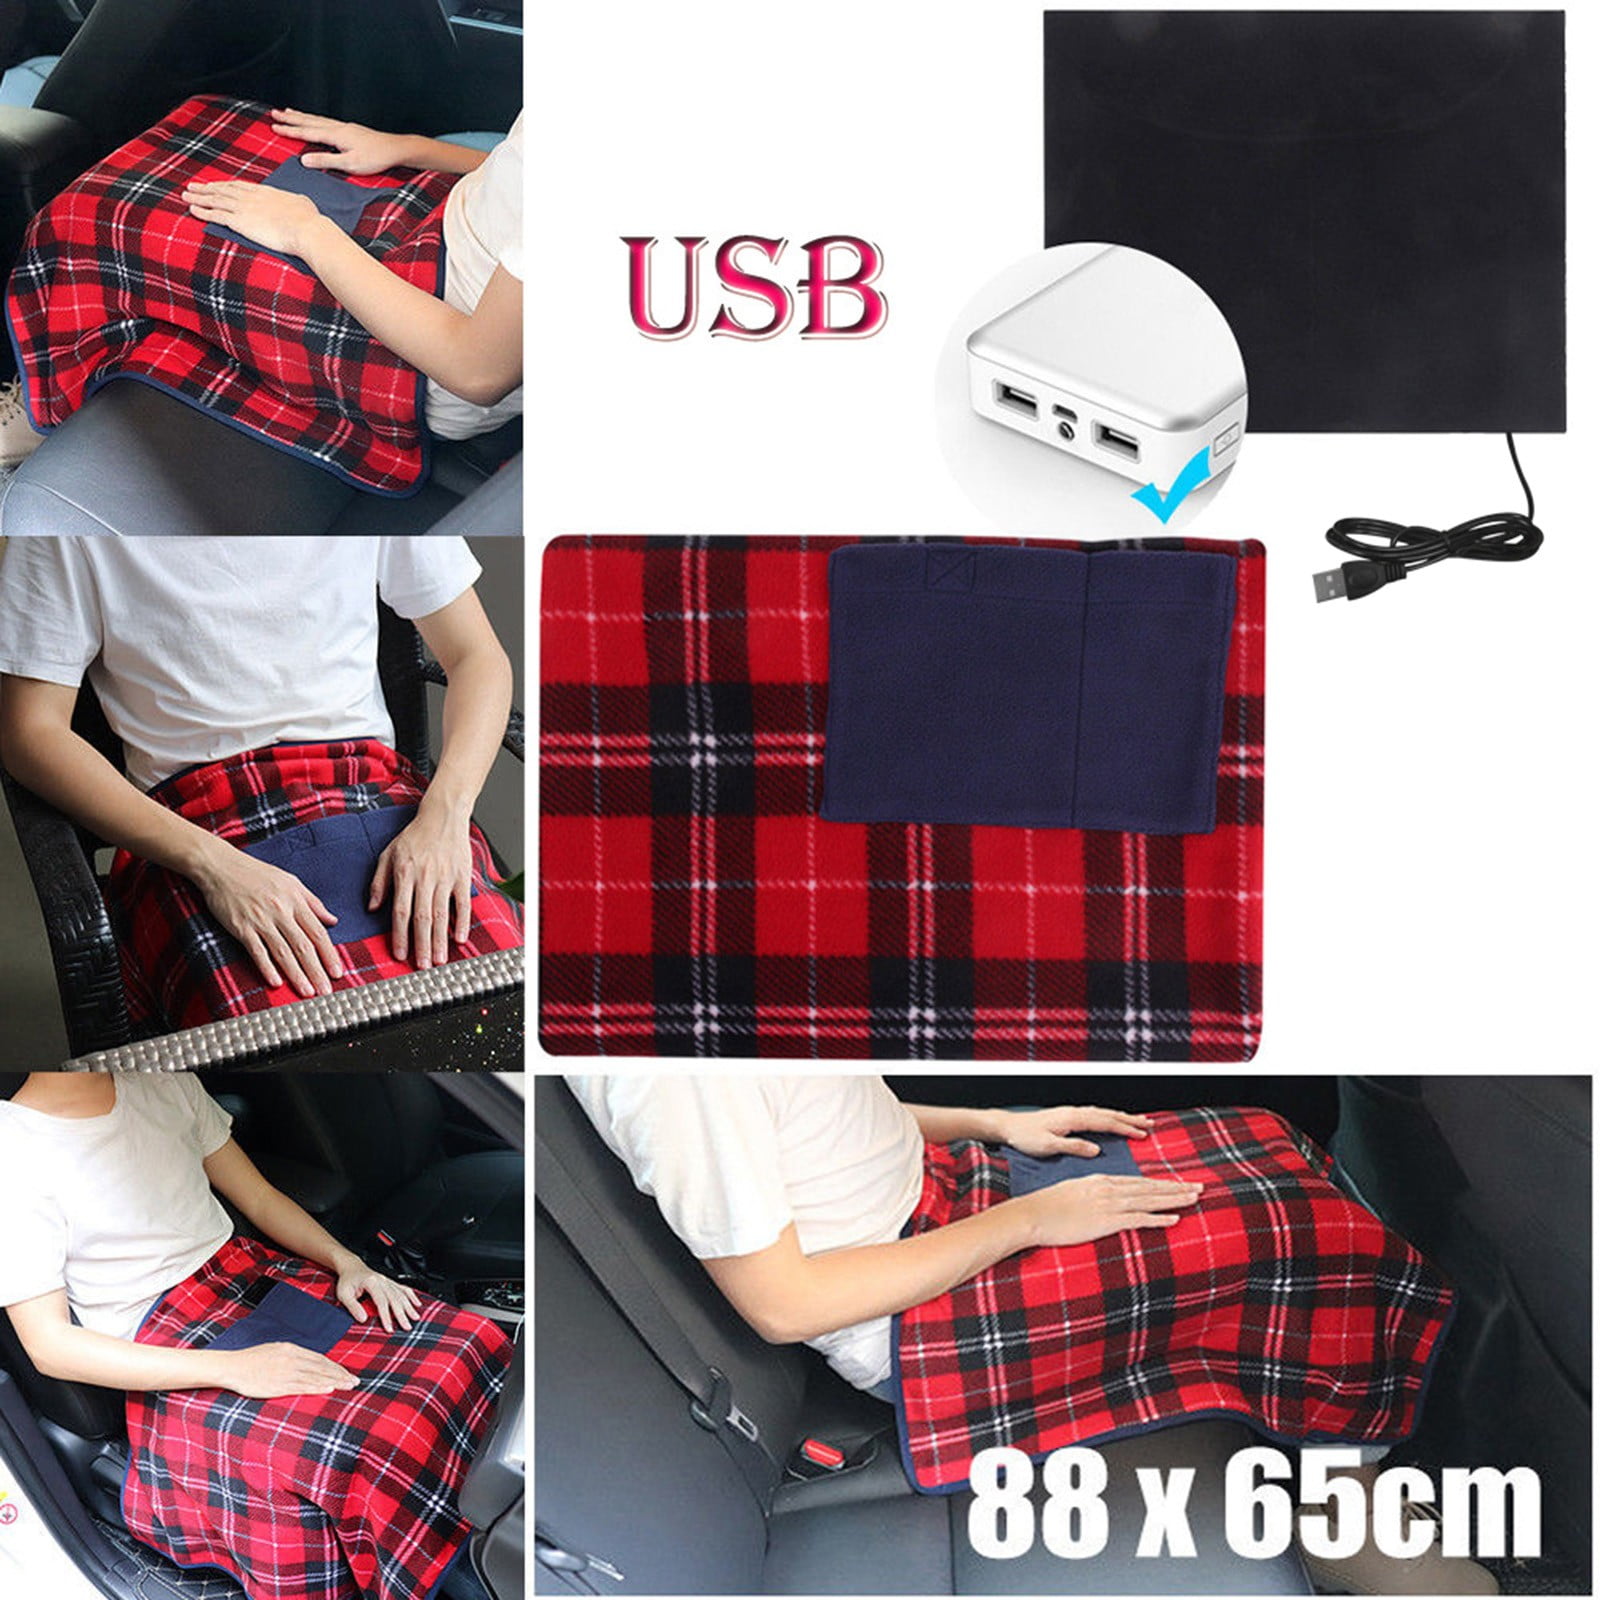 WANYNG Portable 5V USB Electric Heated Car Office Use Winter Warm Blanket  Cover Heater Soft Lap Blanket - Walmart.com